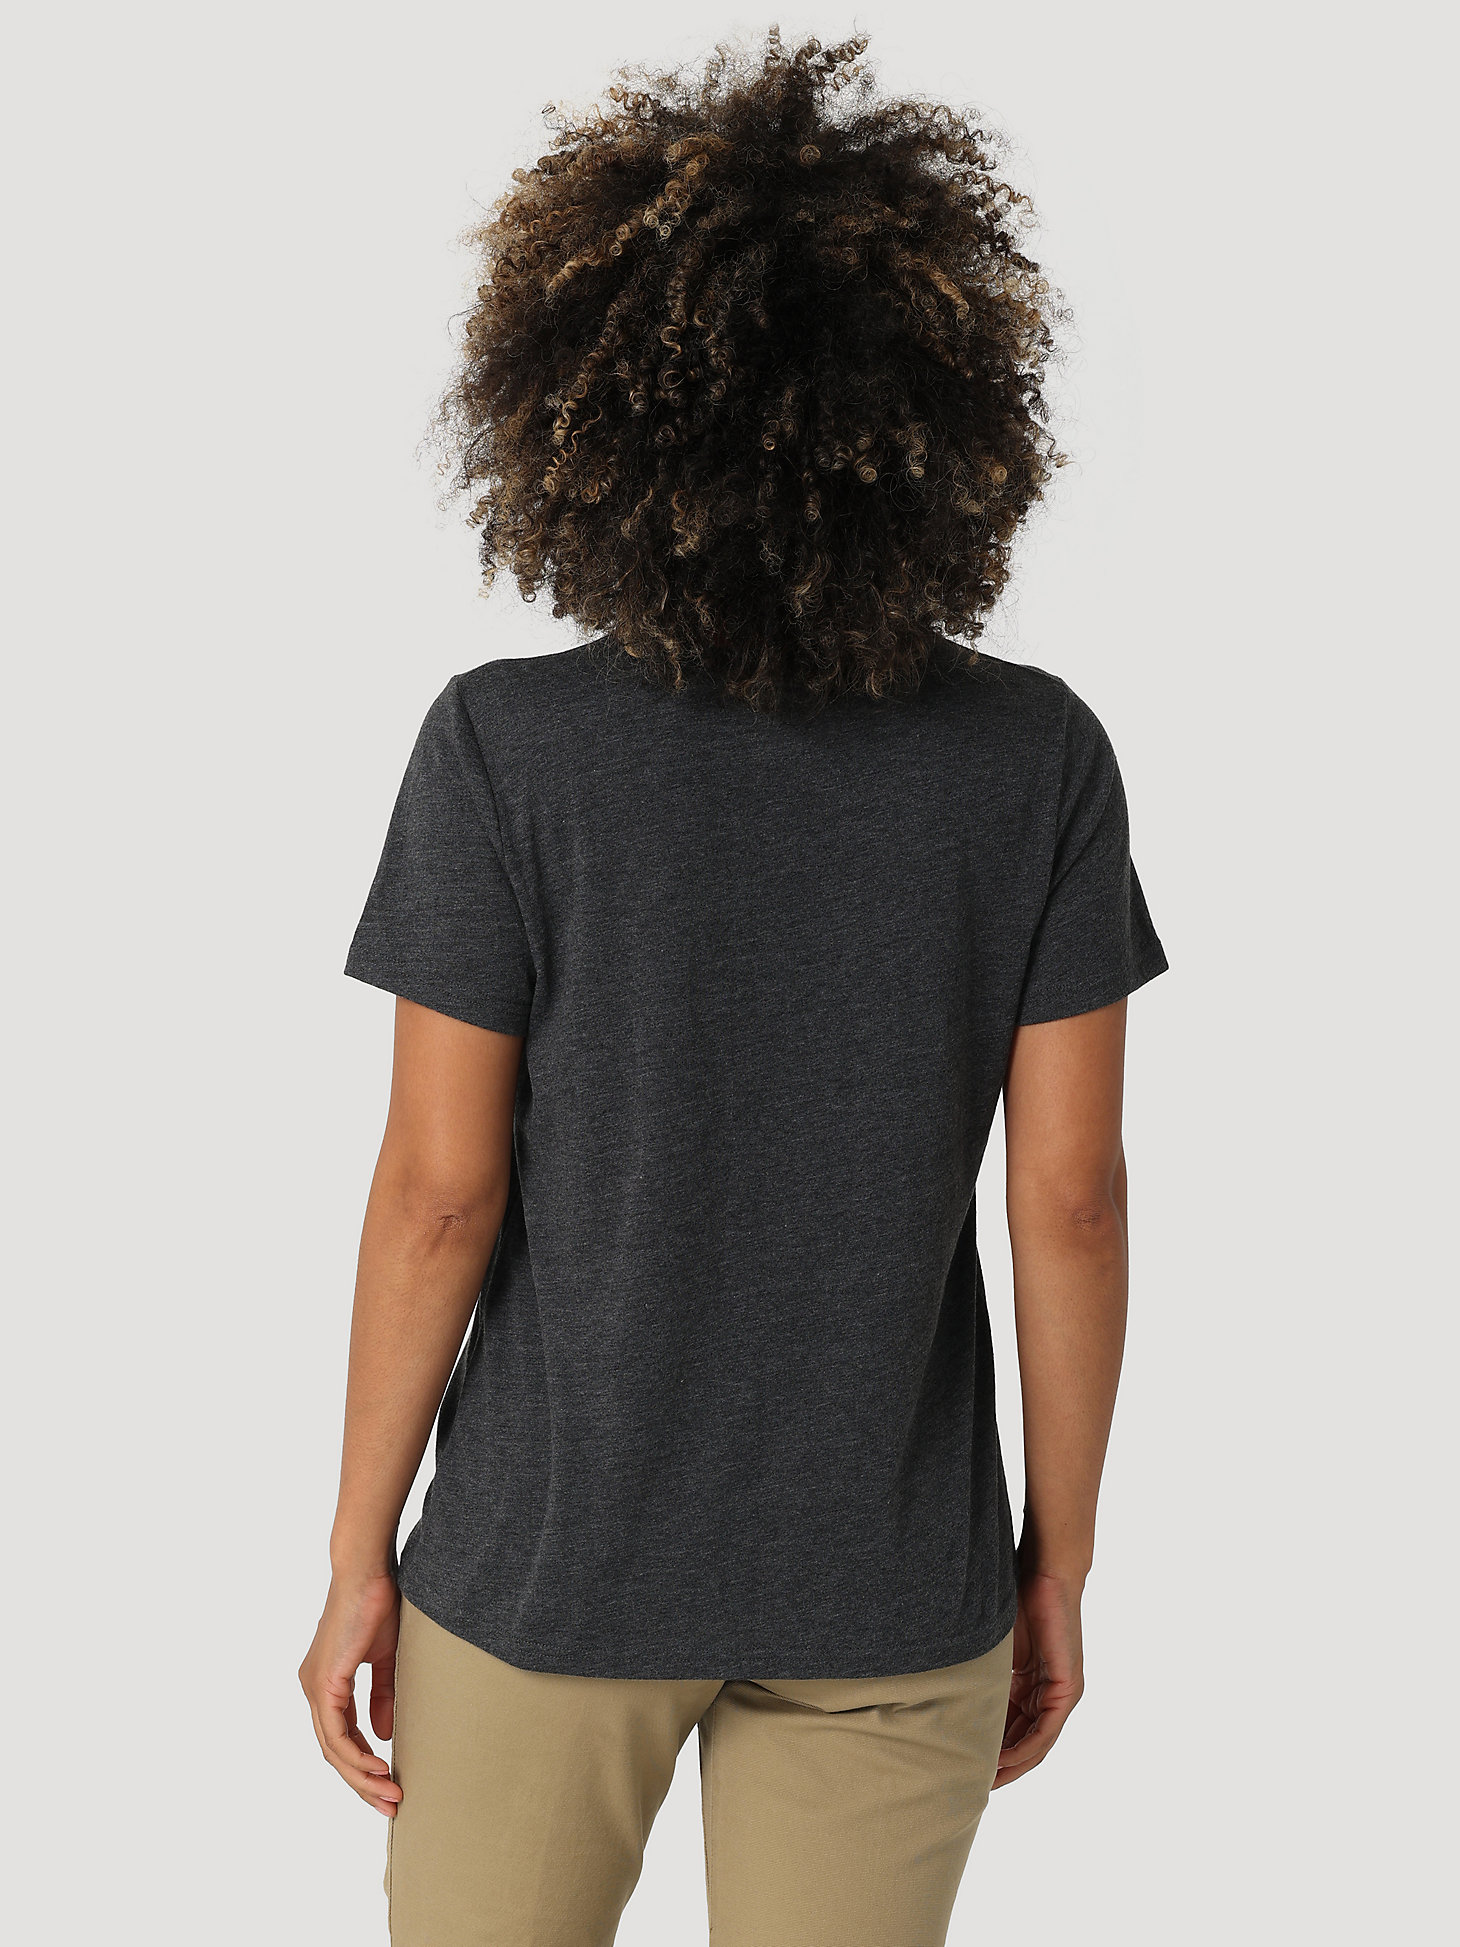 ATG By Wrangler™ Women's Graphic Tee in Caviar alternative view 2